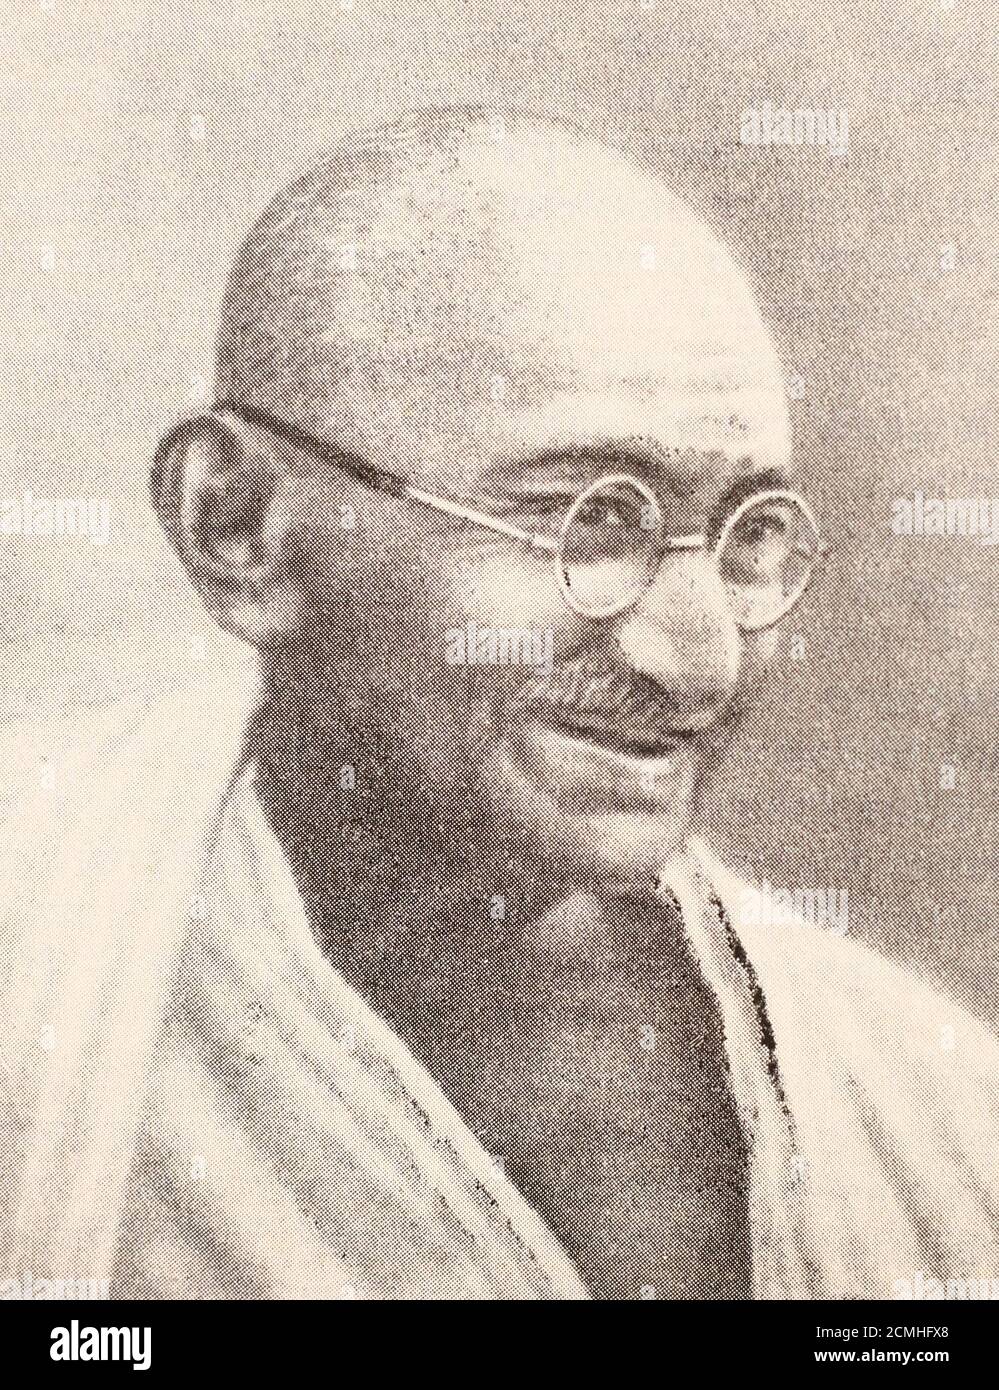 Mahatma Gandhi in 1921. Mohandas Karamchand Gandhi (2 October 1869 – 30 January 1948) was an Indian lawyer, anti-colonial nationalist, and political ethicist, who employed nonviolent resistance to lead the successful campaign for India's independence from British rule, and in turn inspired movements for civil rights and freedom across the world. The honorific Mahātmā (Sanskrit: 'great-souled', 'venerable'), first applied to him in 1914 in South Africa, is now used throughout the world. Stock Photo